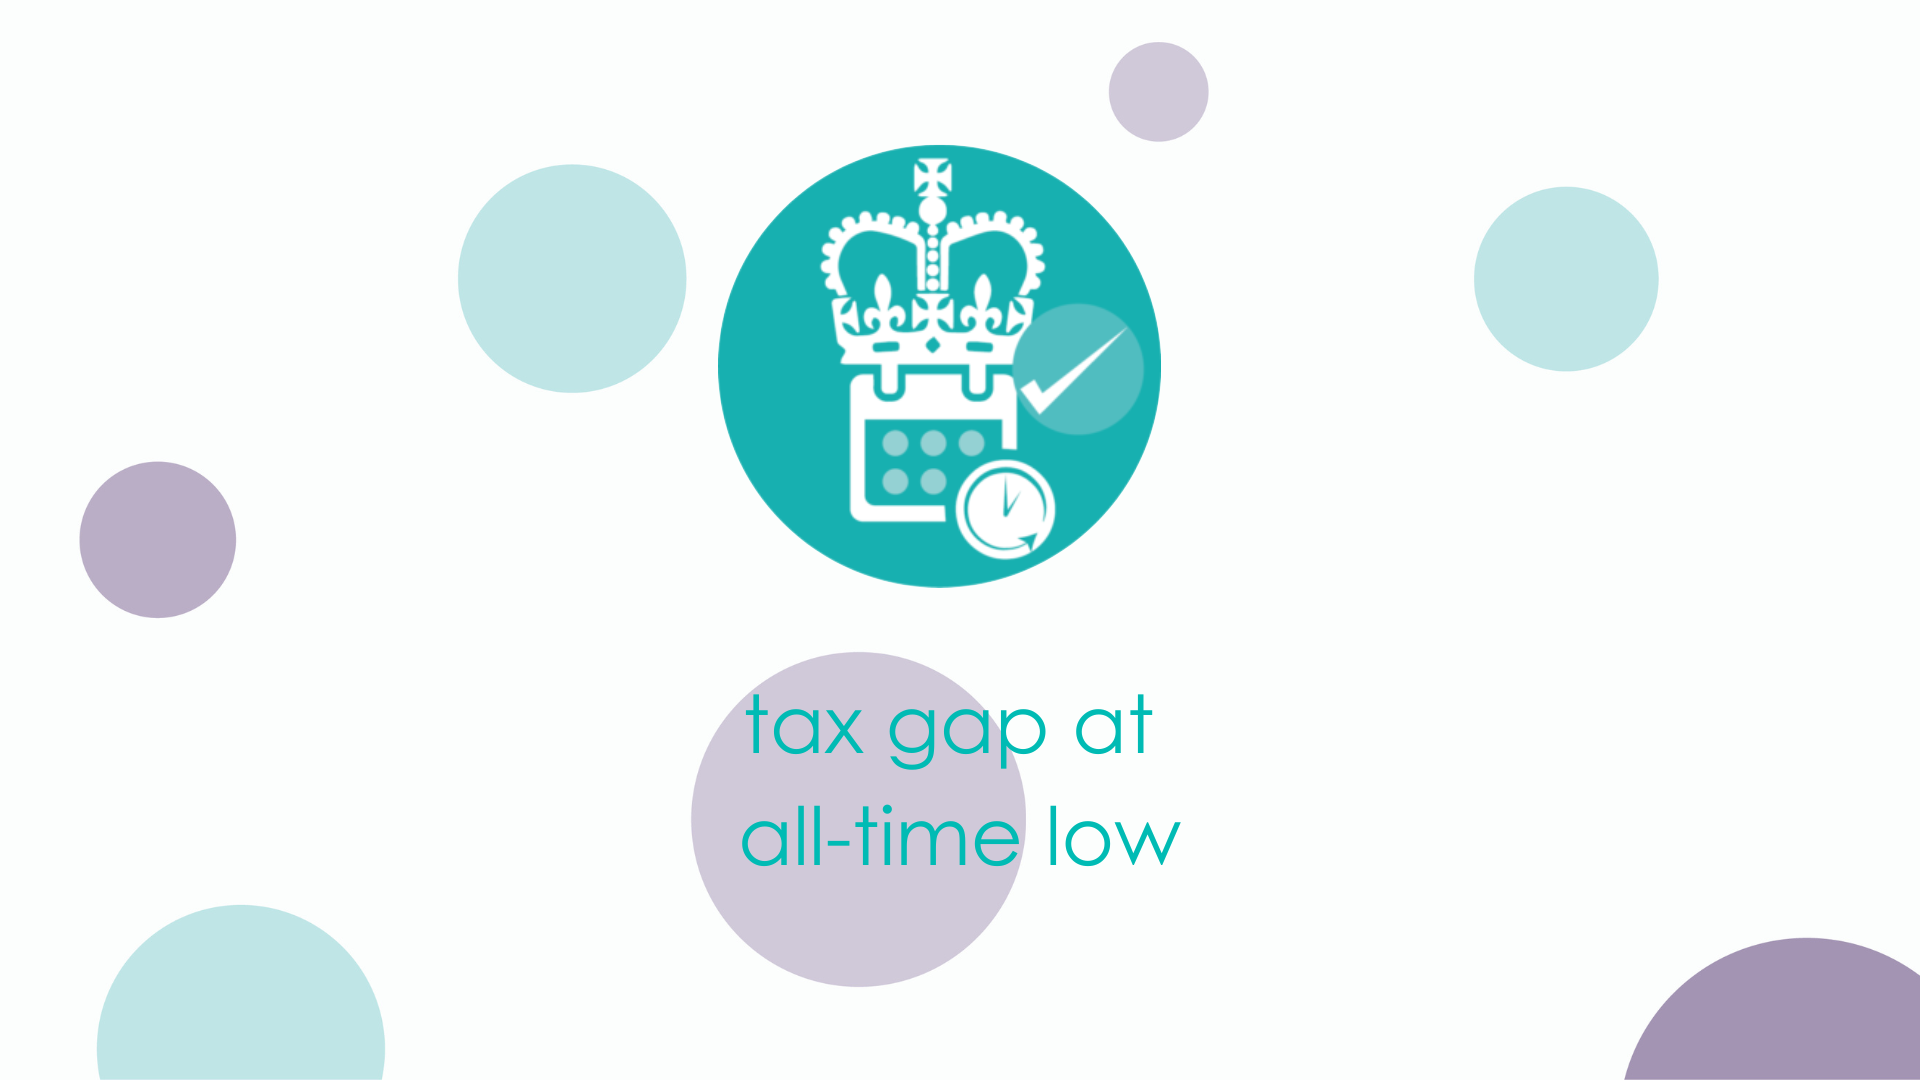 Tax gap at all-time low